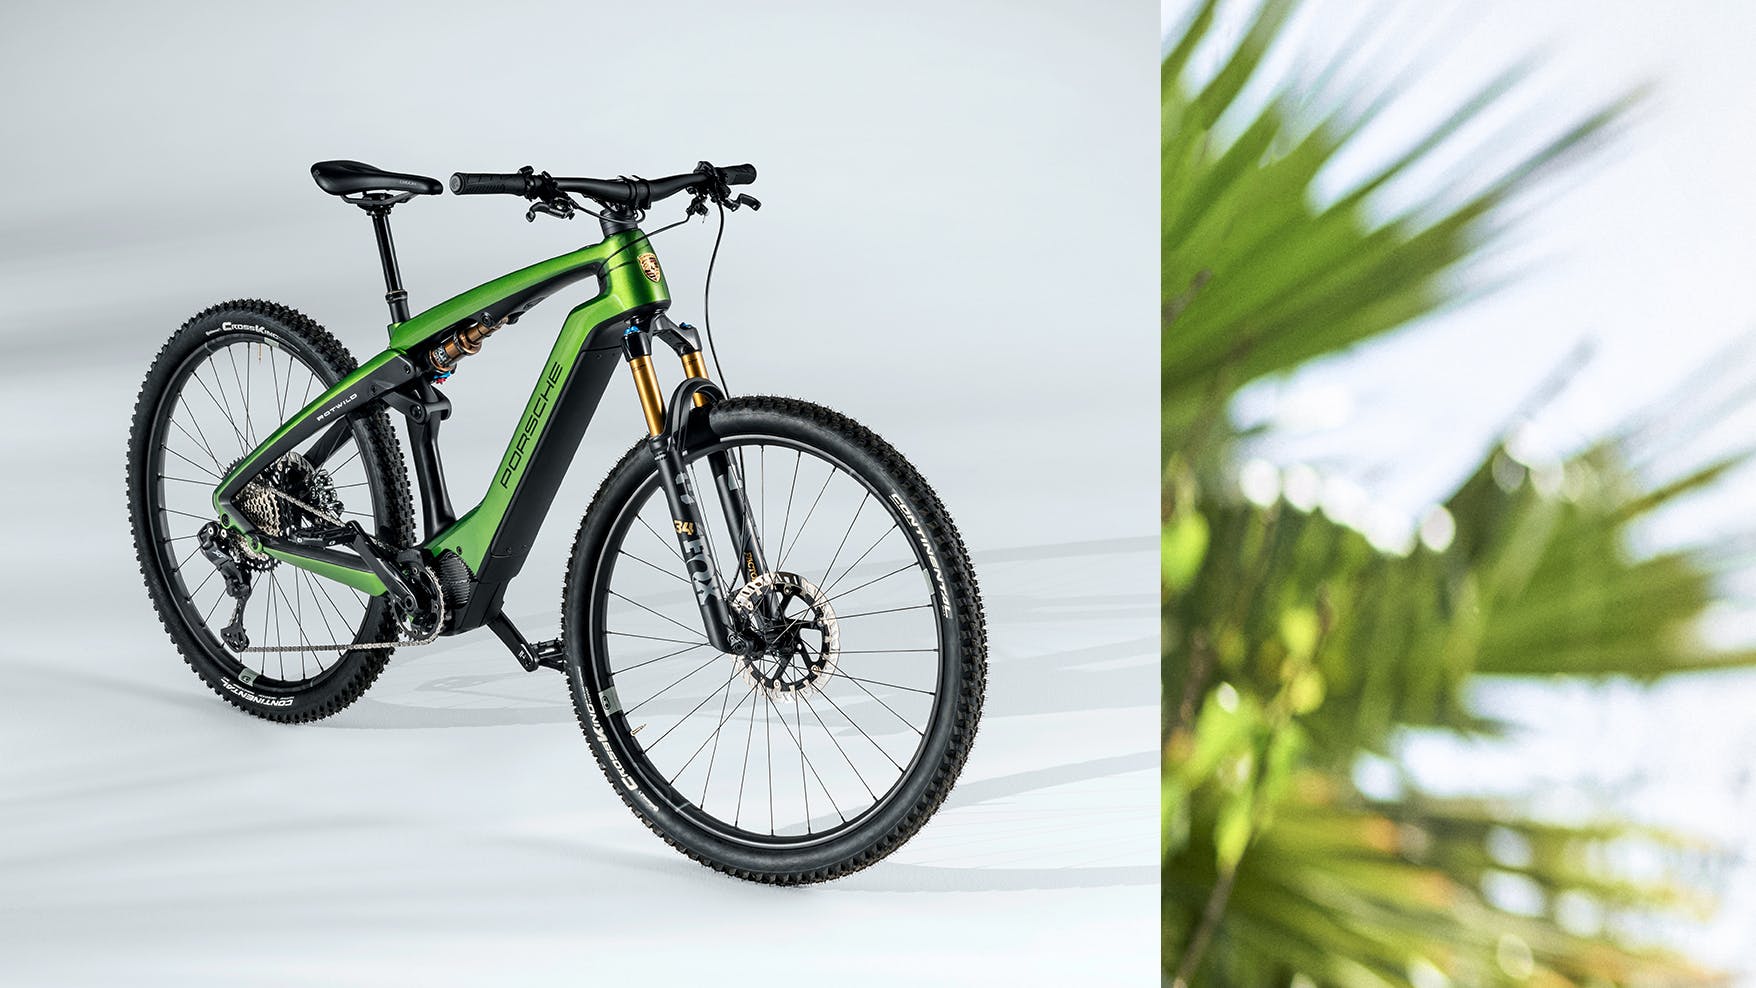 On the left side of the image is the new Porsche eBike Cross Performance EXC in green. On the right side of the picture are palm trees.